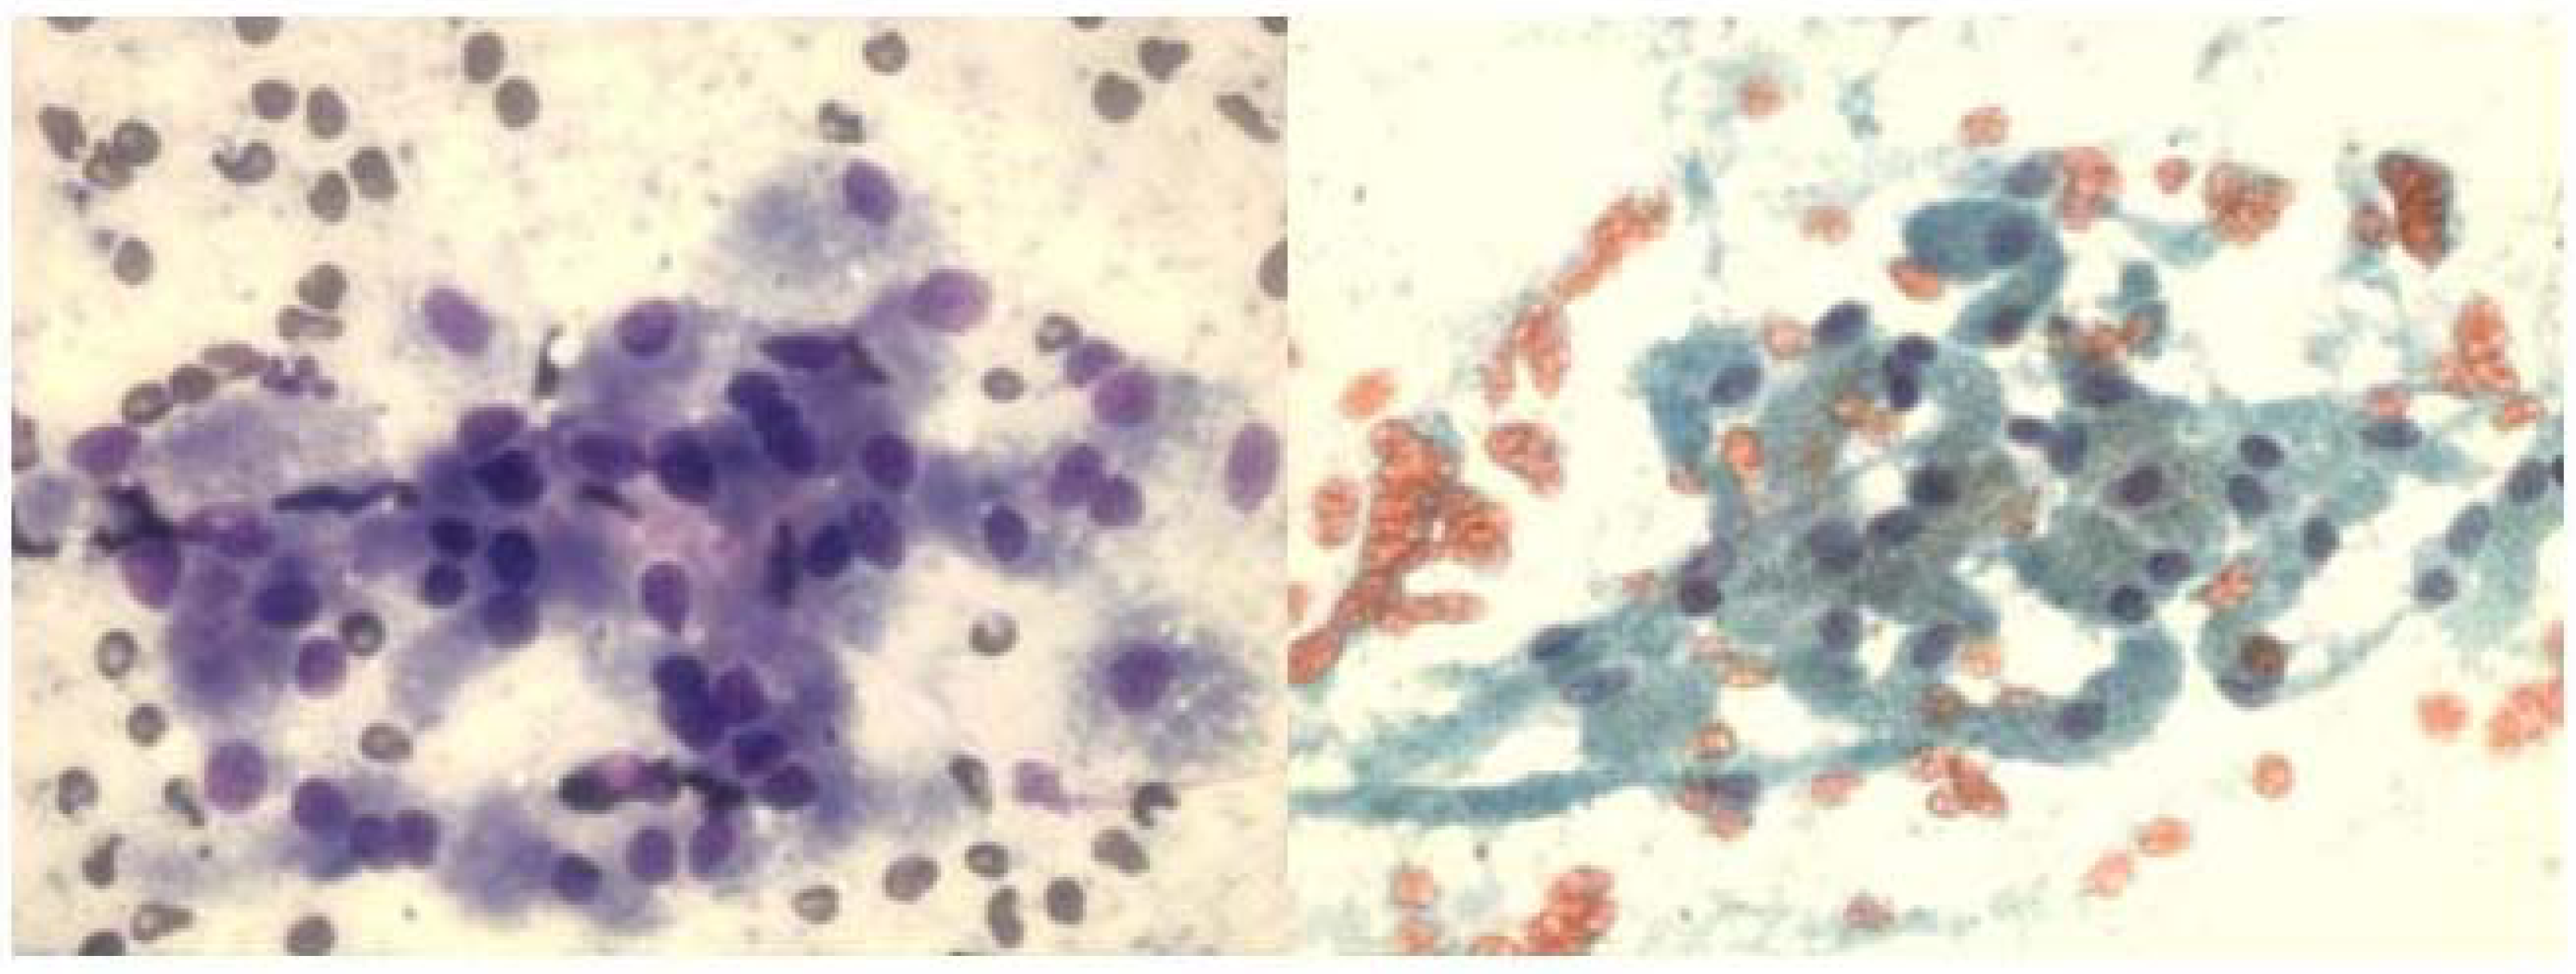 a and b. FNA smears of granular cell tumor displaying discohesive clusters of uniform large cells with abundant granular cytoplasm and central round bland nuclei. (a, Diff-Quik, ×400;b, Papanicolaou satin, ×400).